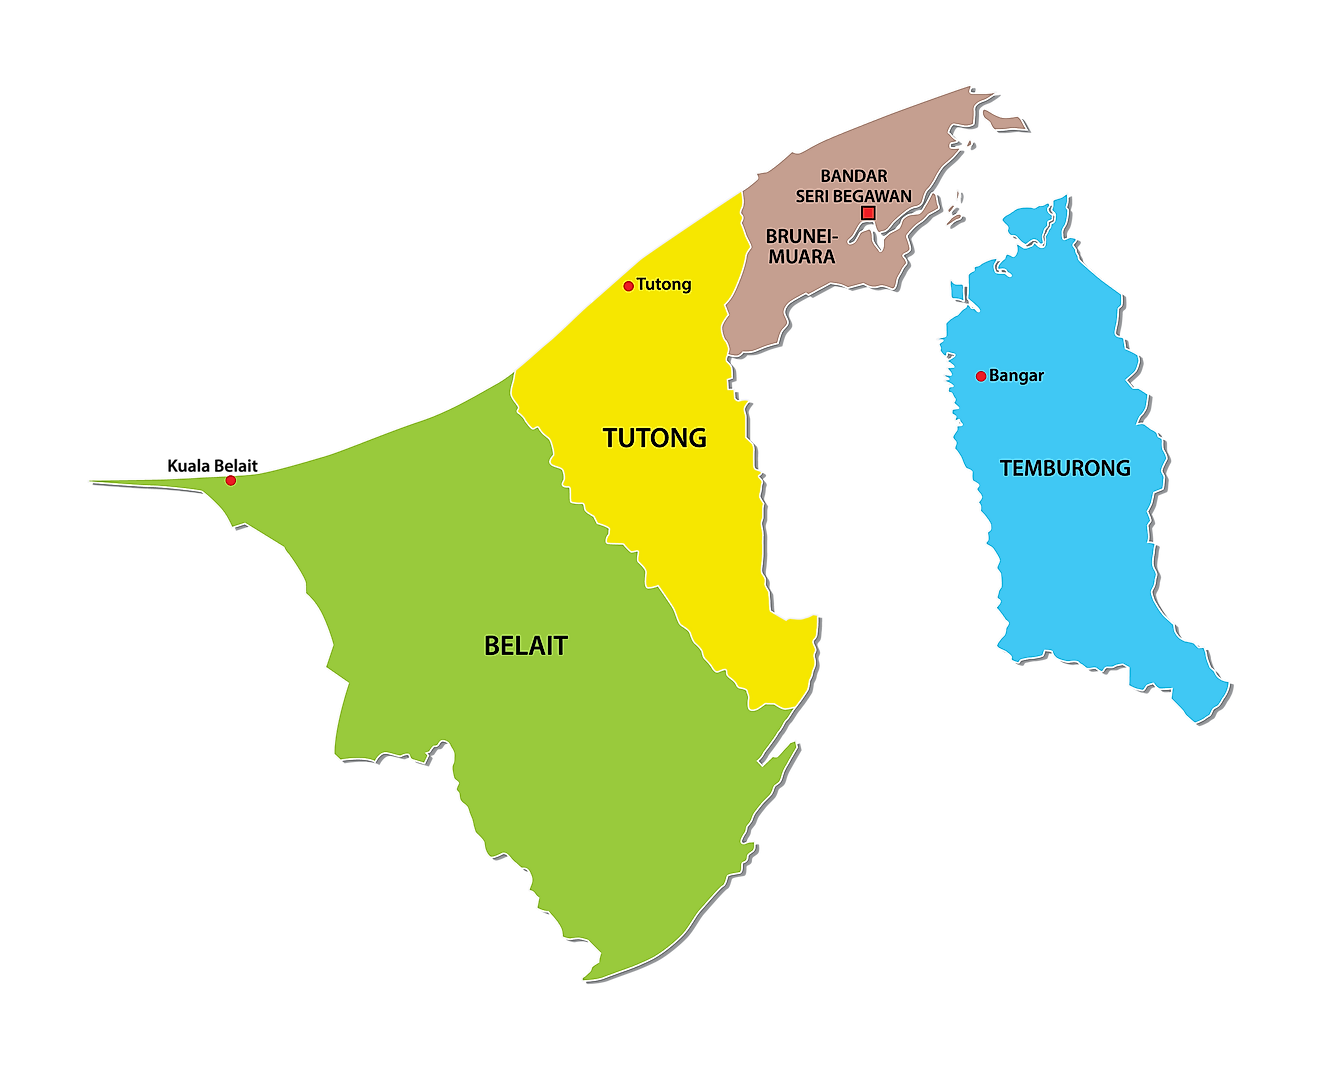 Political Map of Brunei showing the 4 districts of Brunei, important urban centres and the national capital of Bander Seri Begawan.